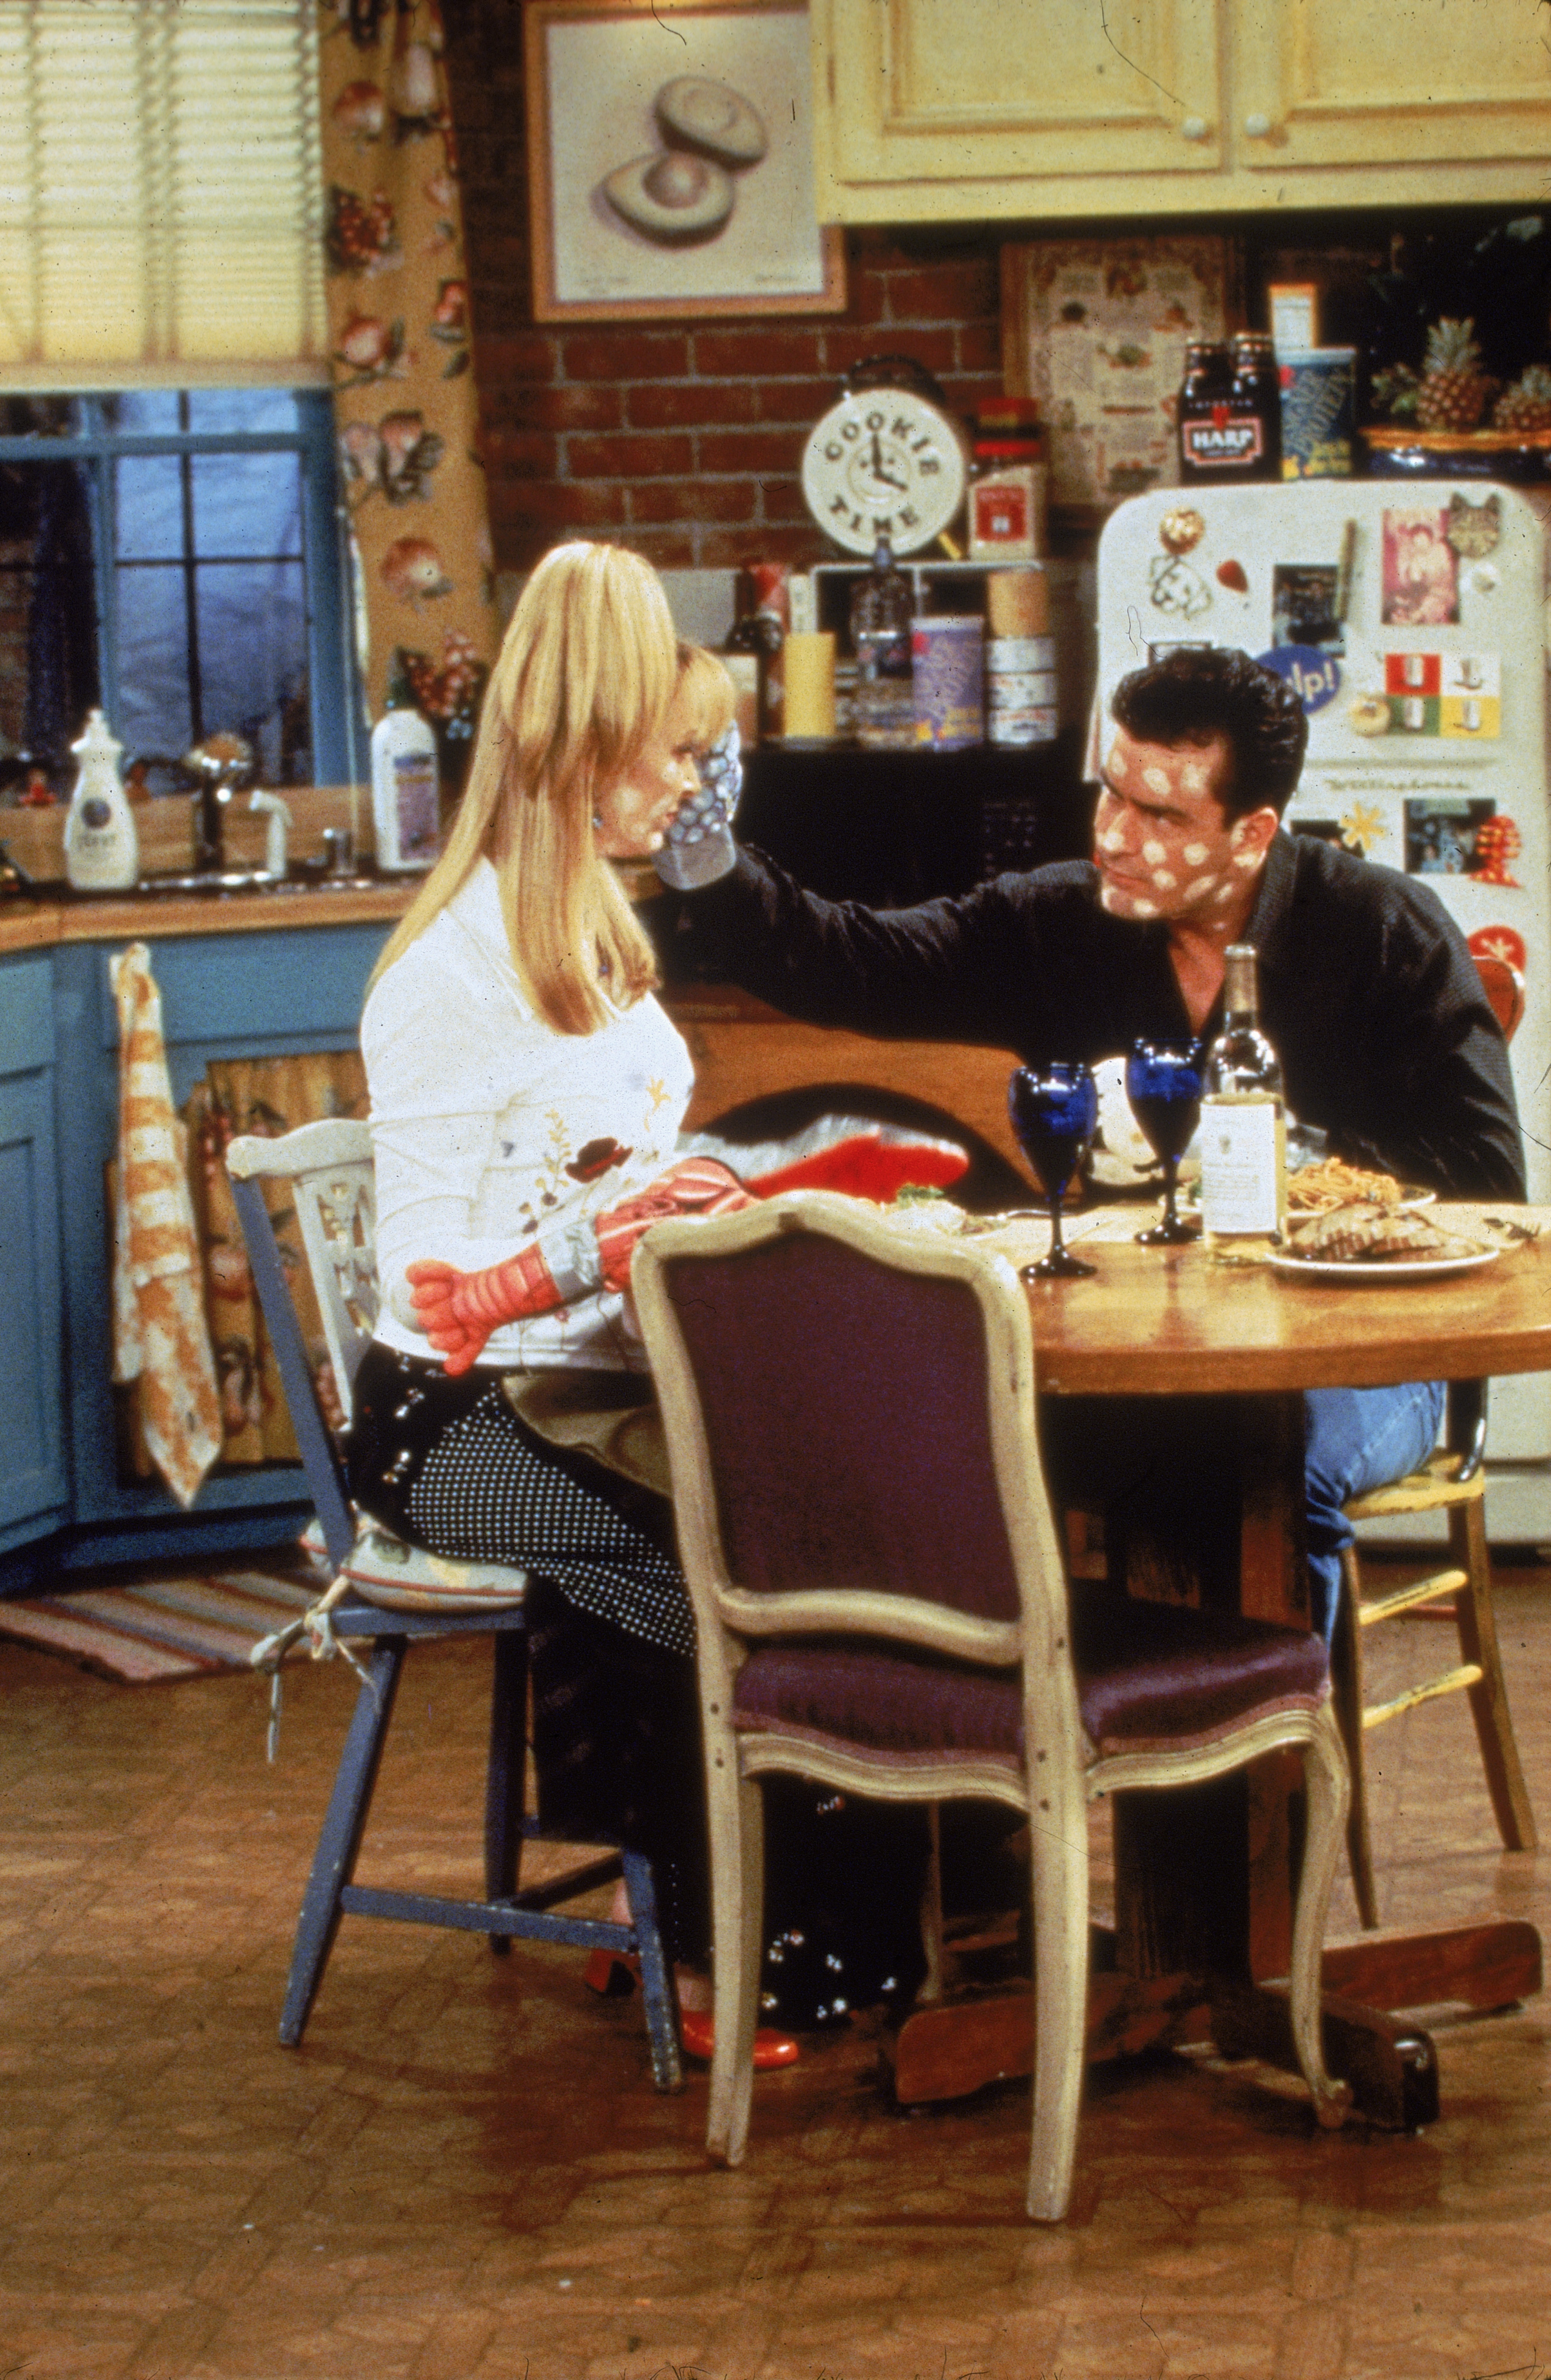 Lisa Kudrow and Charlie Sheen on the set of the TV series "Friends" in 1996 | Source: Getty Images